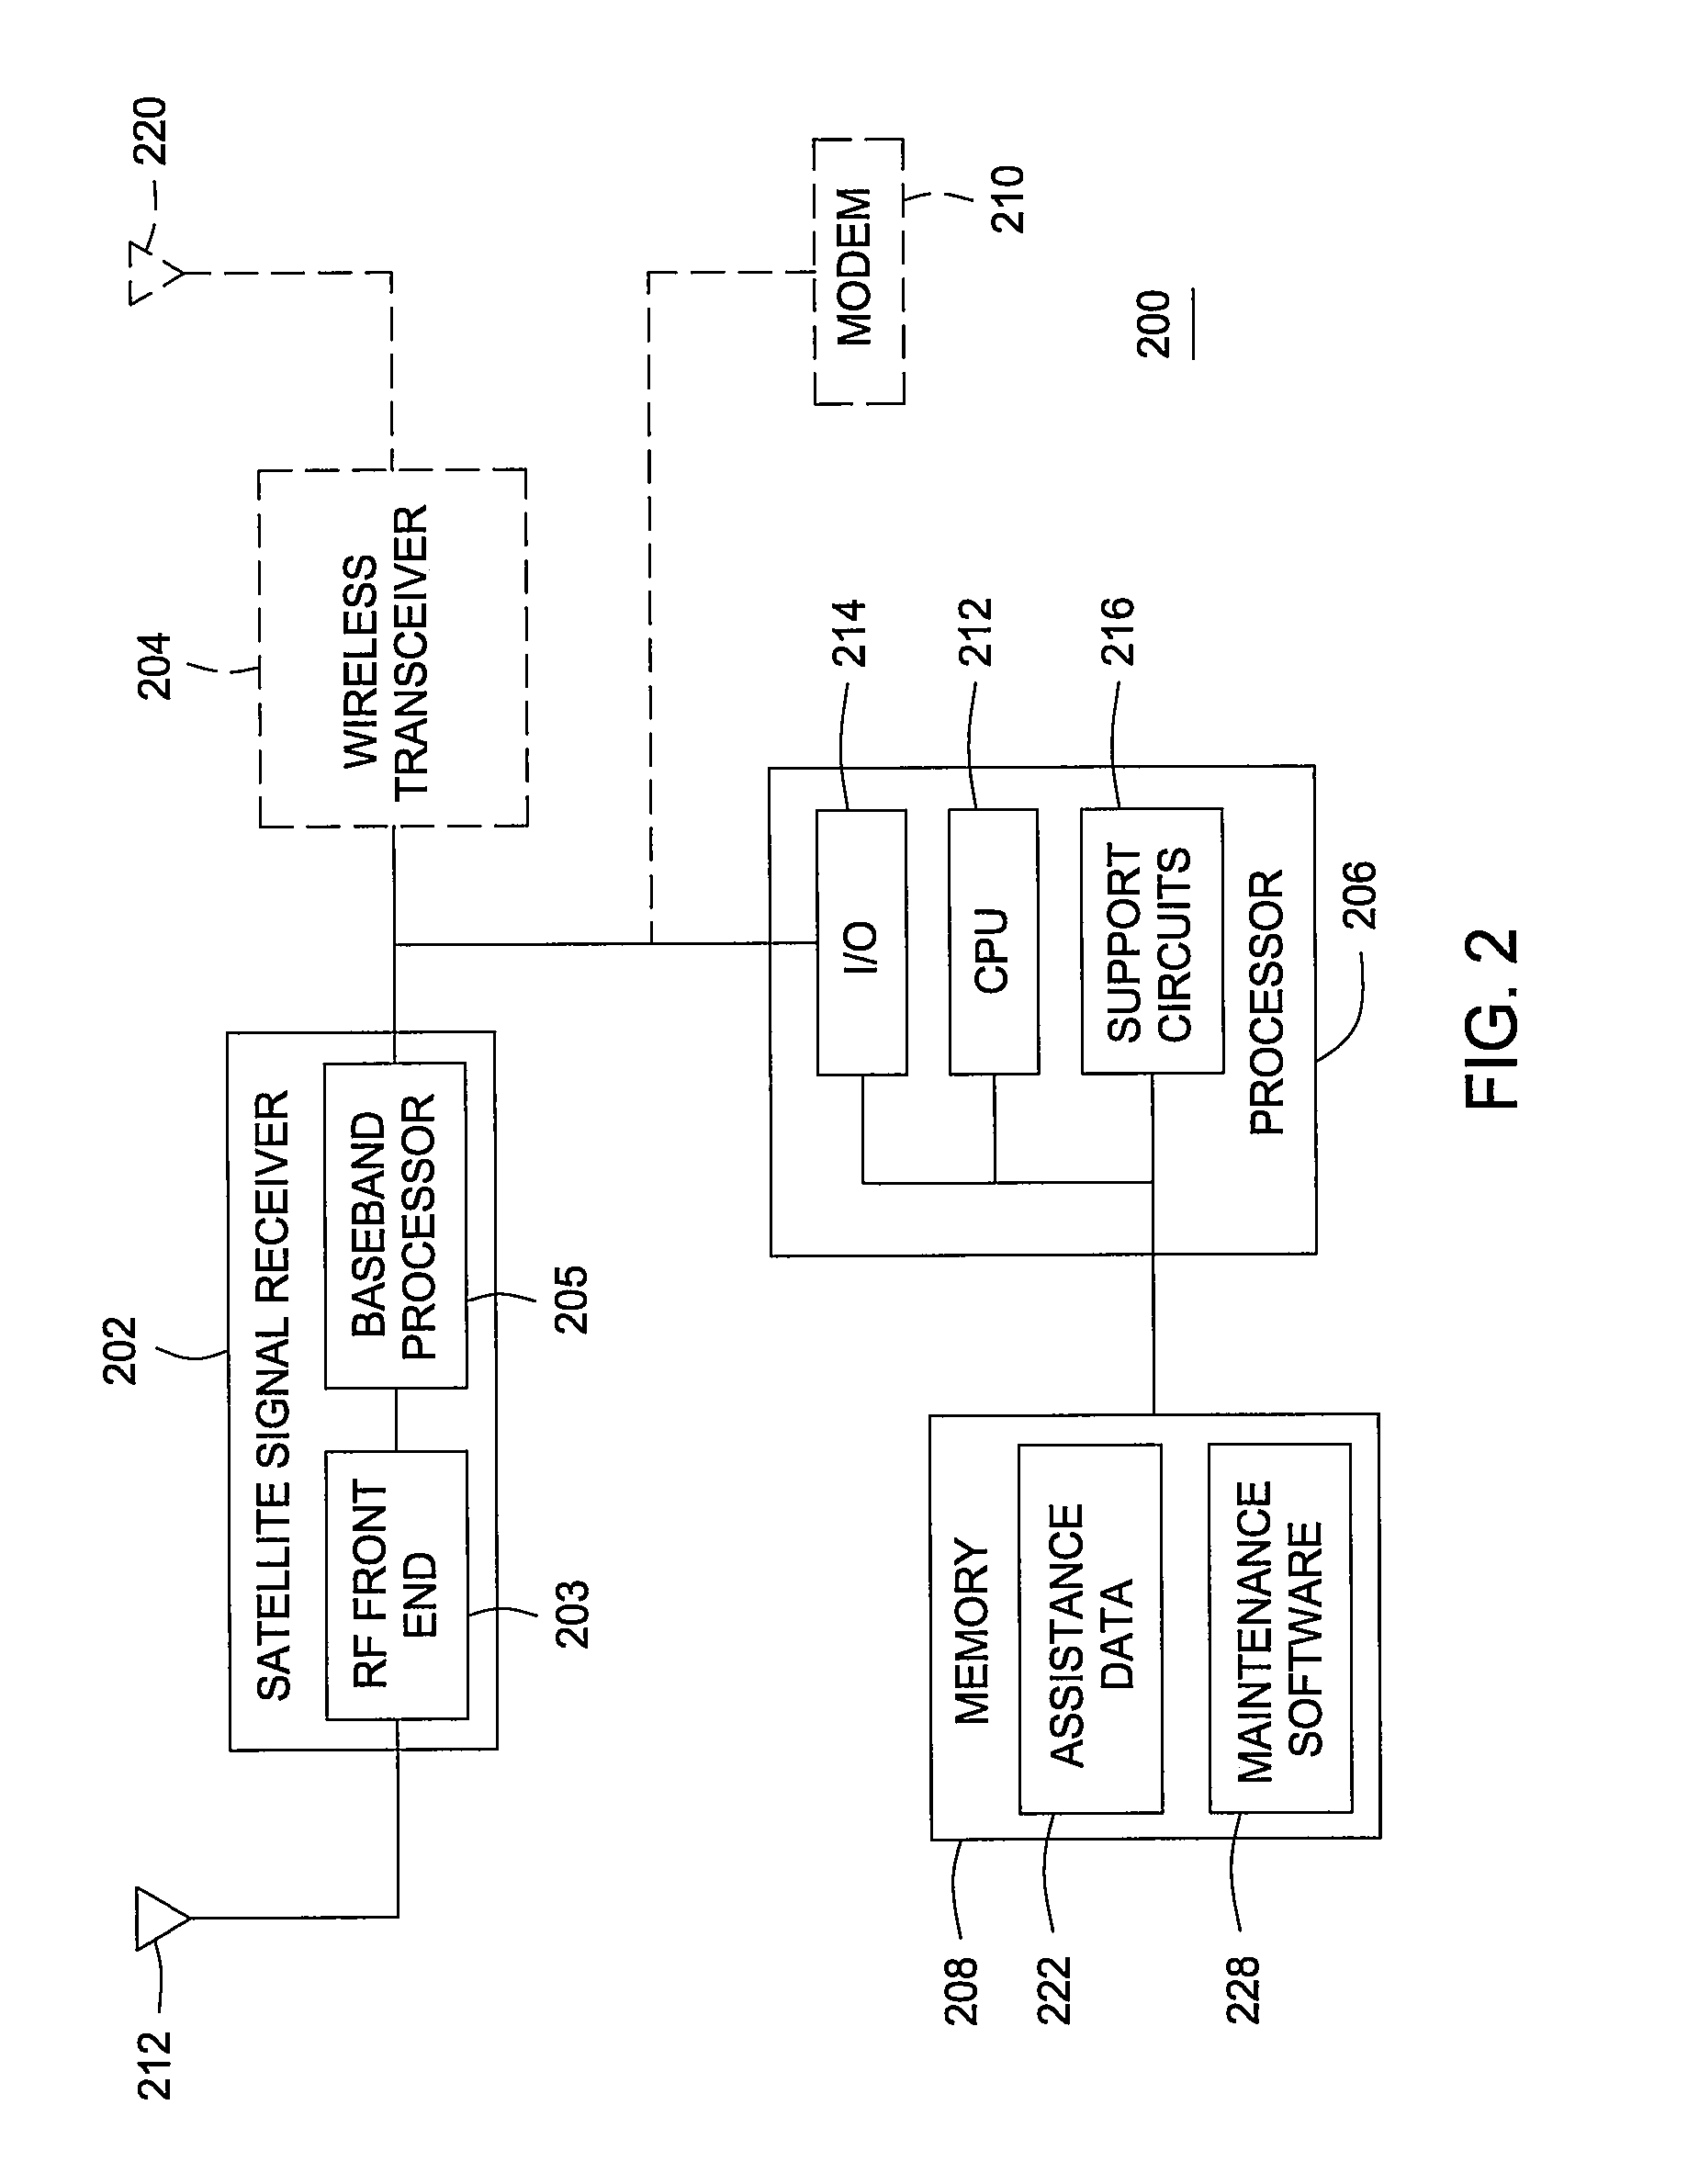 Method and apparatus for improving accuracy and/or integrity of long-term-orbit information for a global-navigation-satellite system